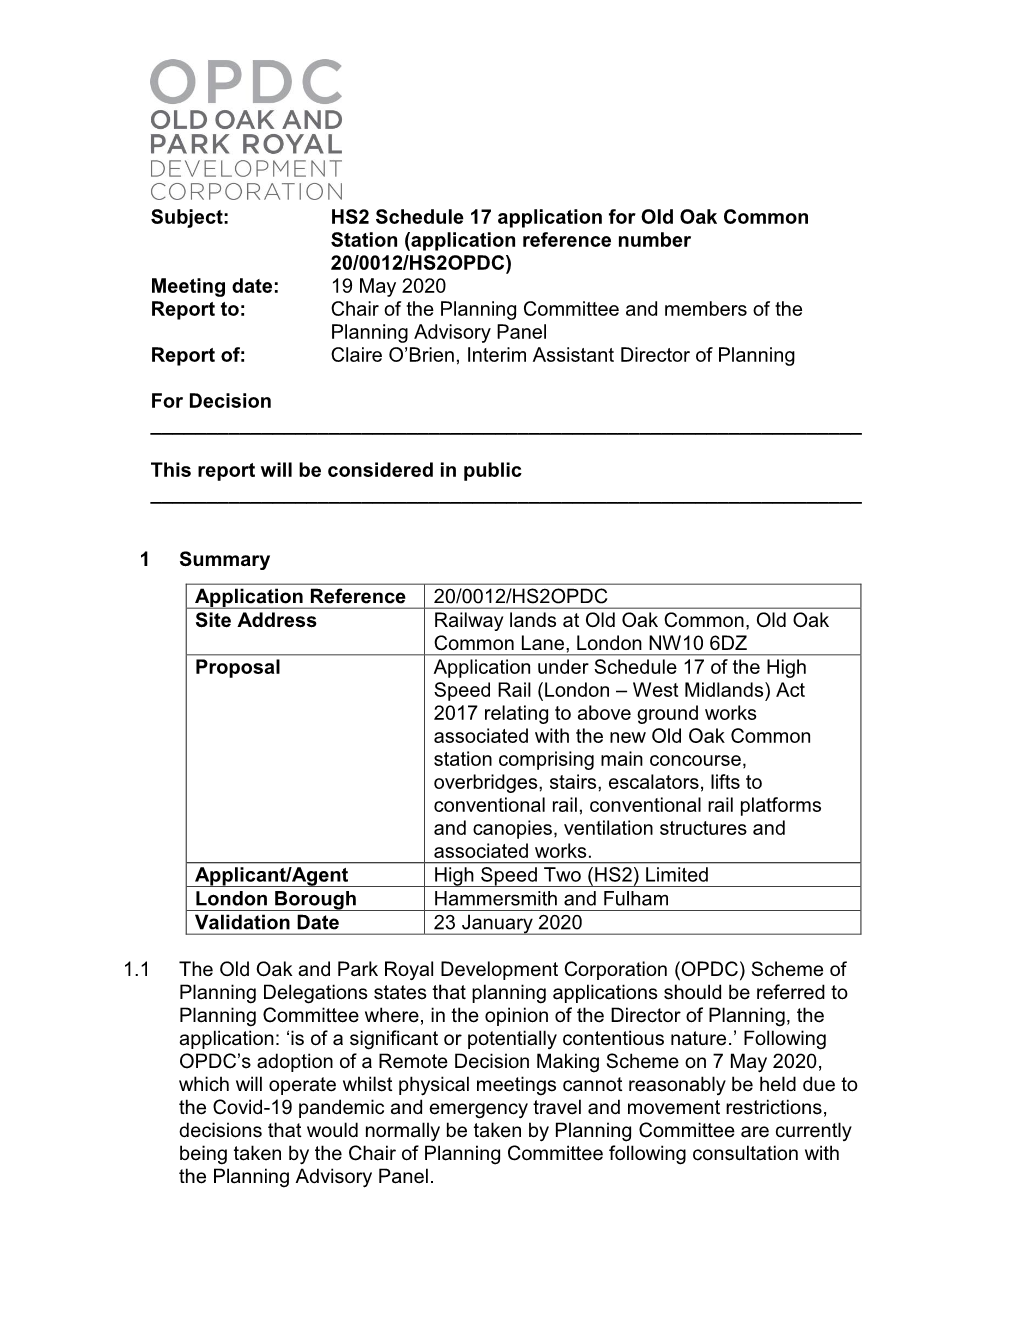 Subject: HS2 Schedule 17 Application for Old Oak Common Station